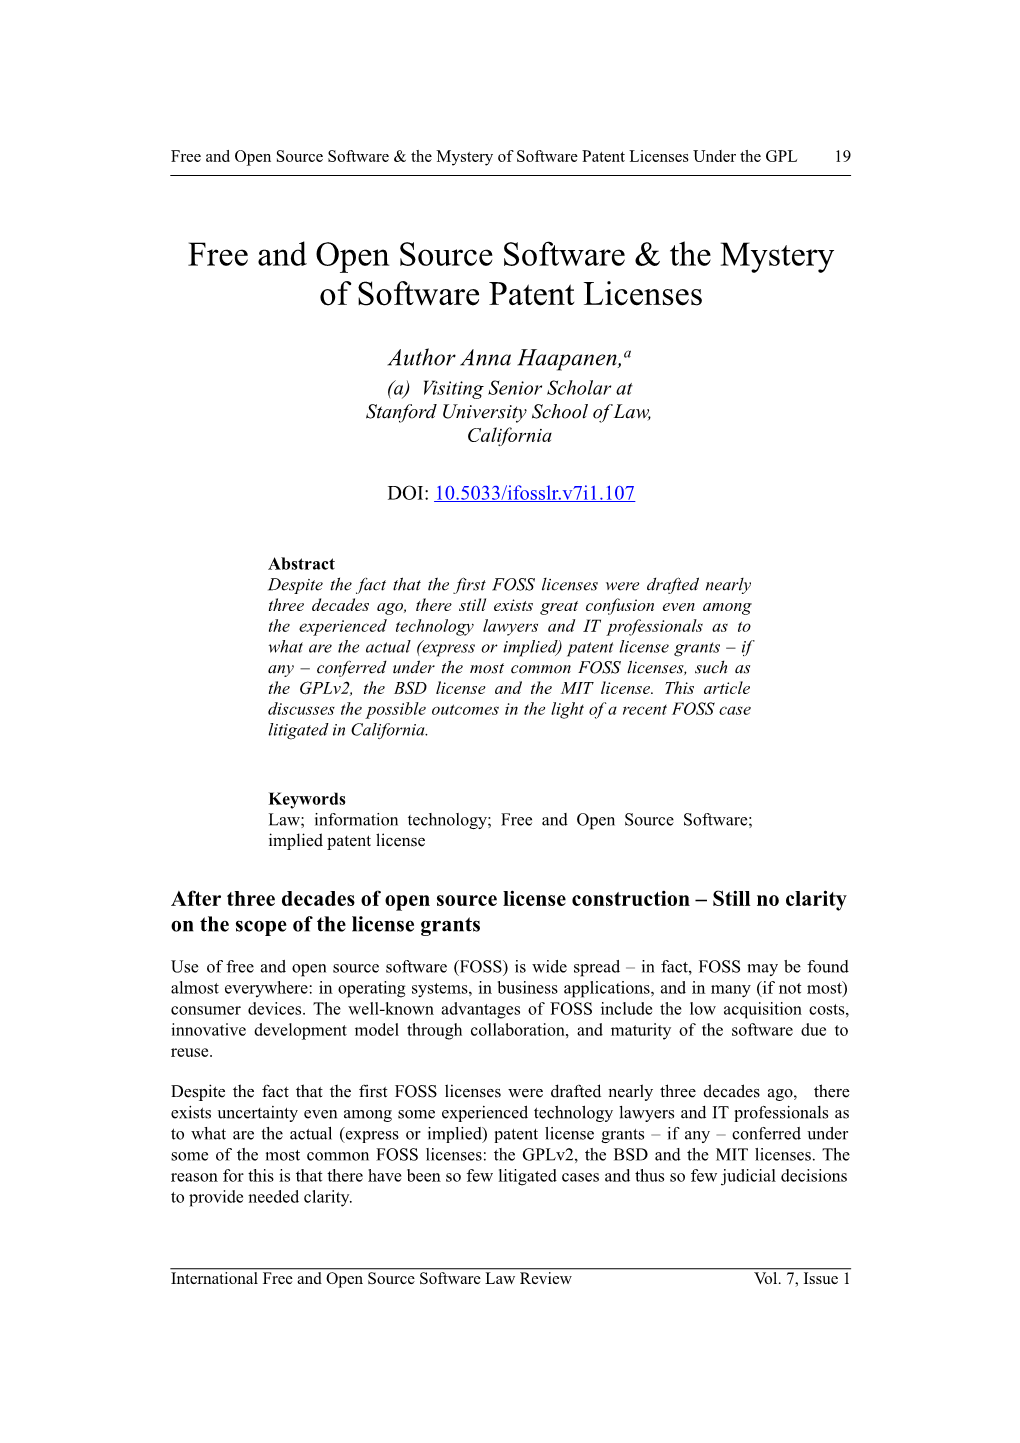 Free and Open Source Software & the Mystery of Software Patent Licenses